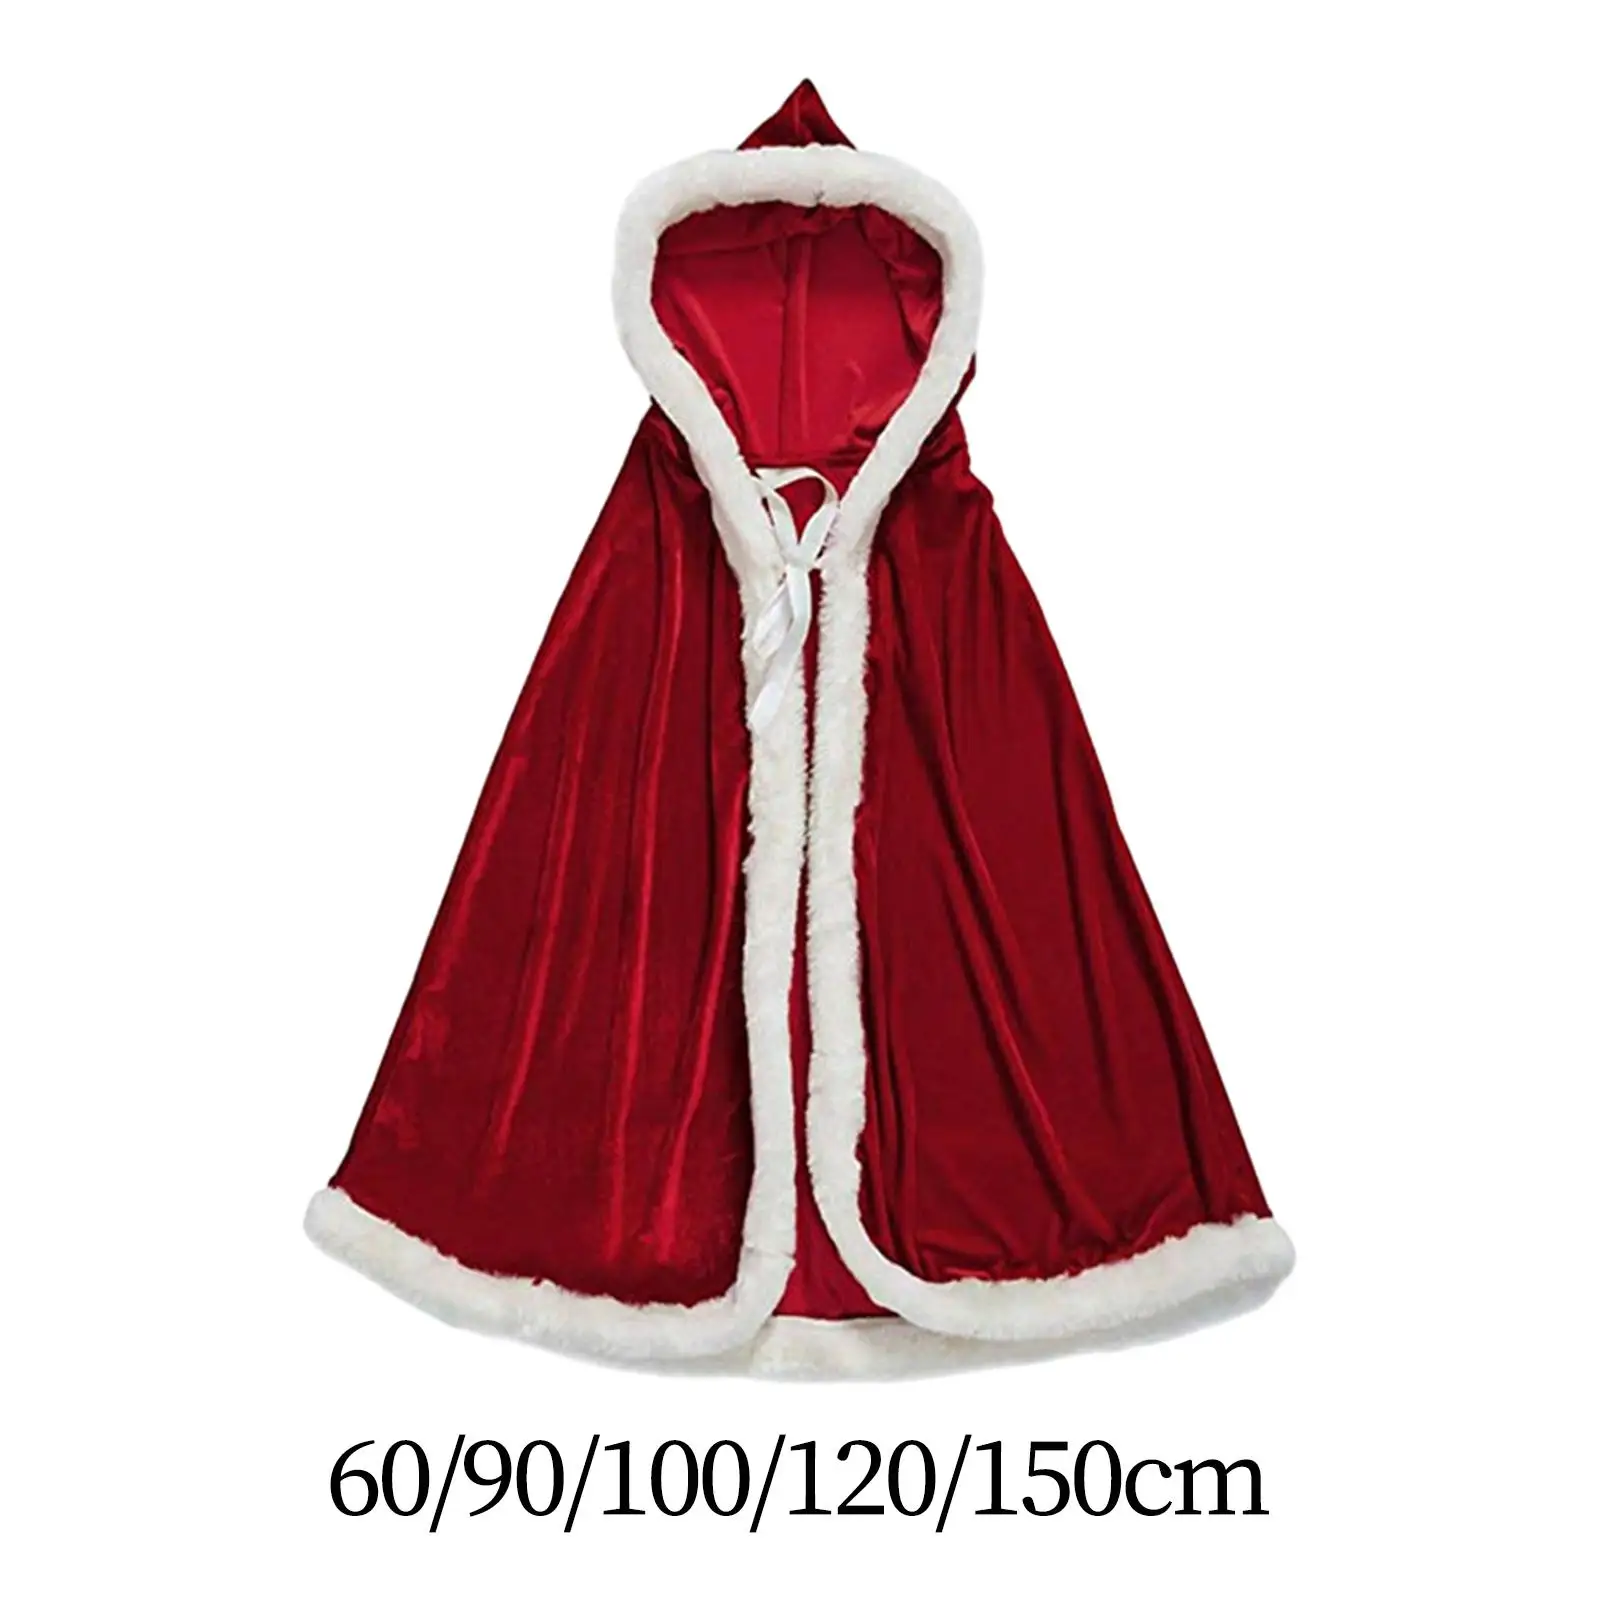 

Christmas Cloak Lacing up Santa Cape Soft Lightweight Elegant Santa Claus Cape Robe for Cosplay Props Holidays Party Fancy Dress